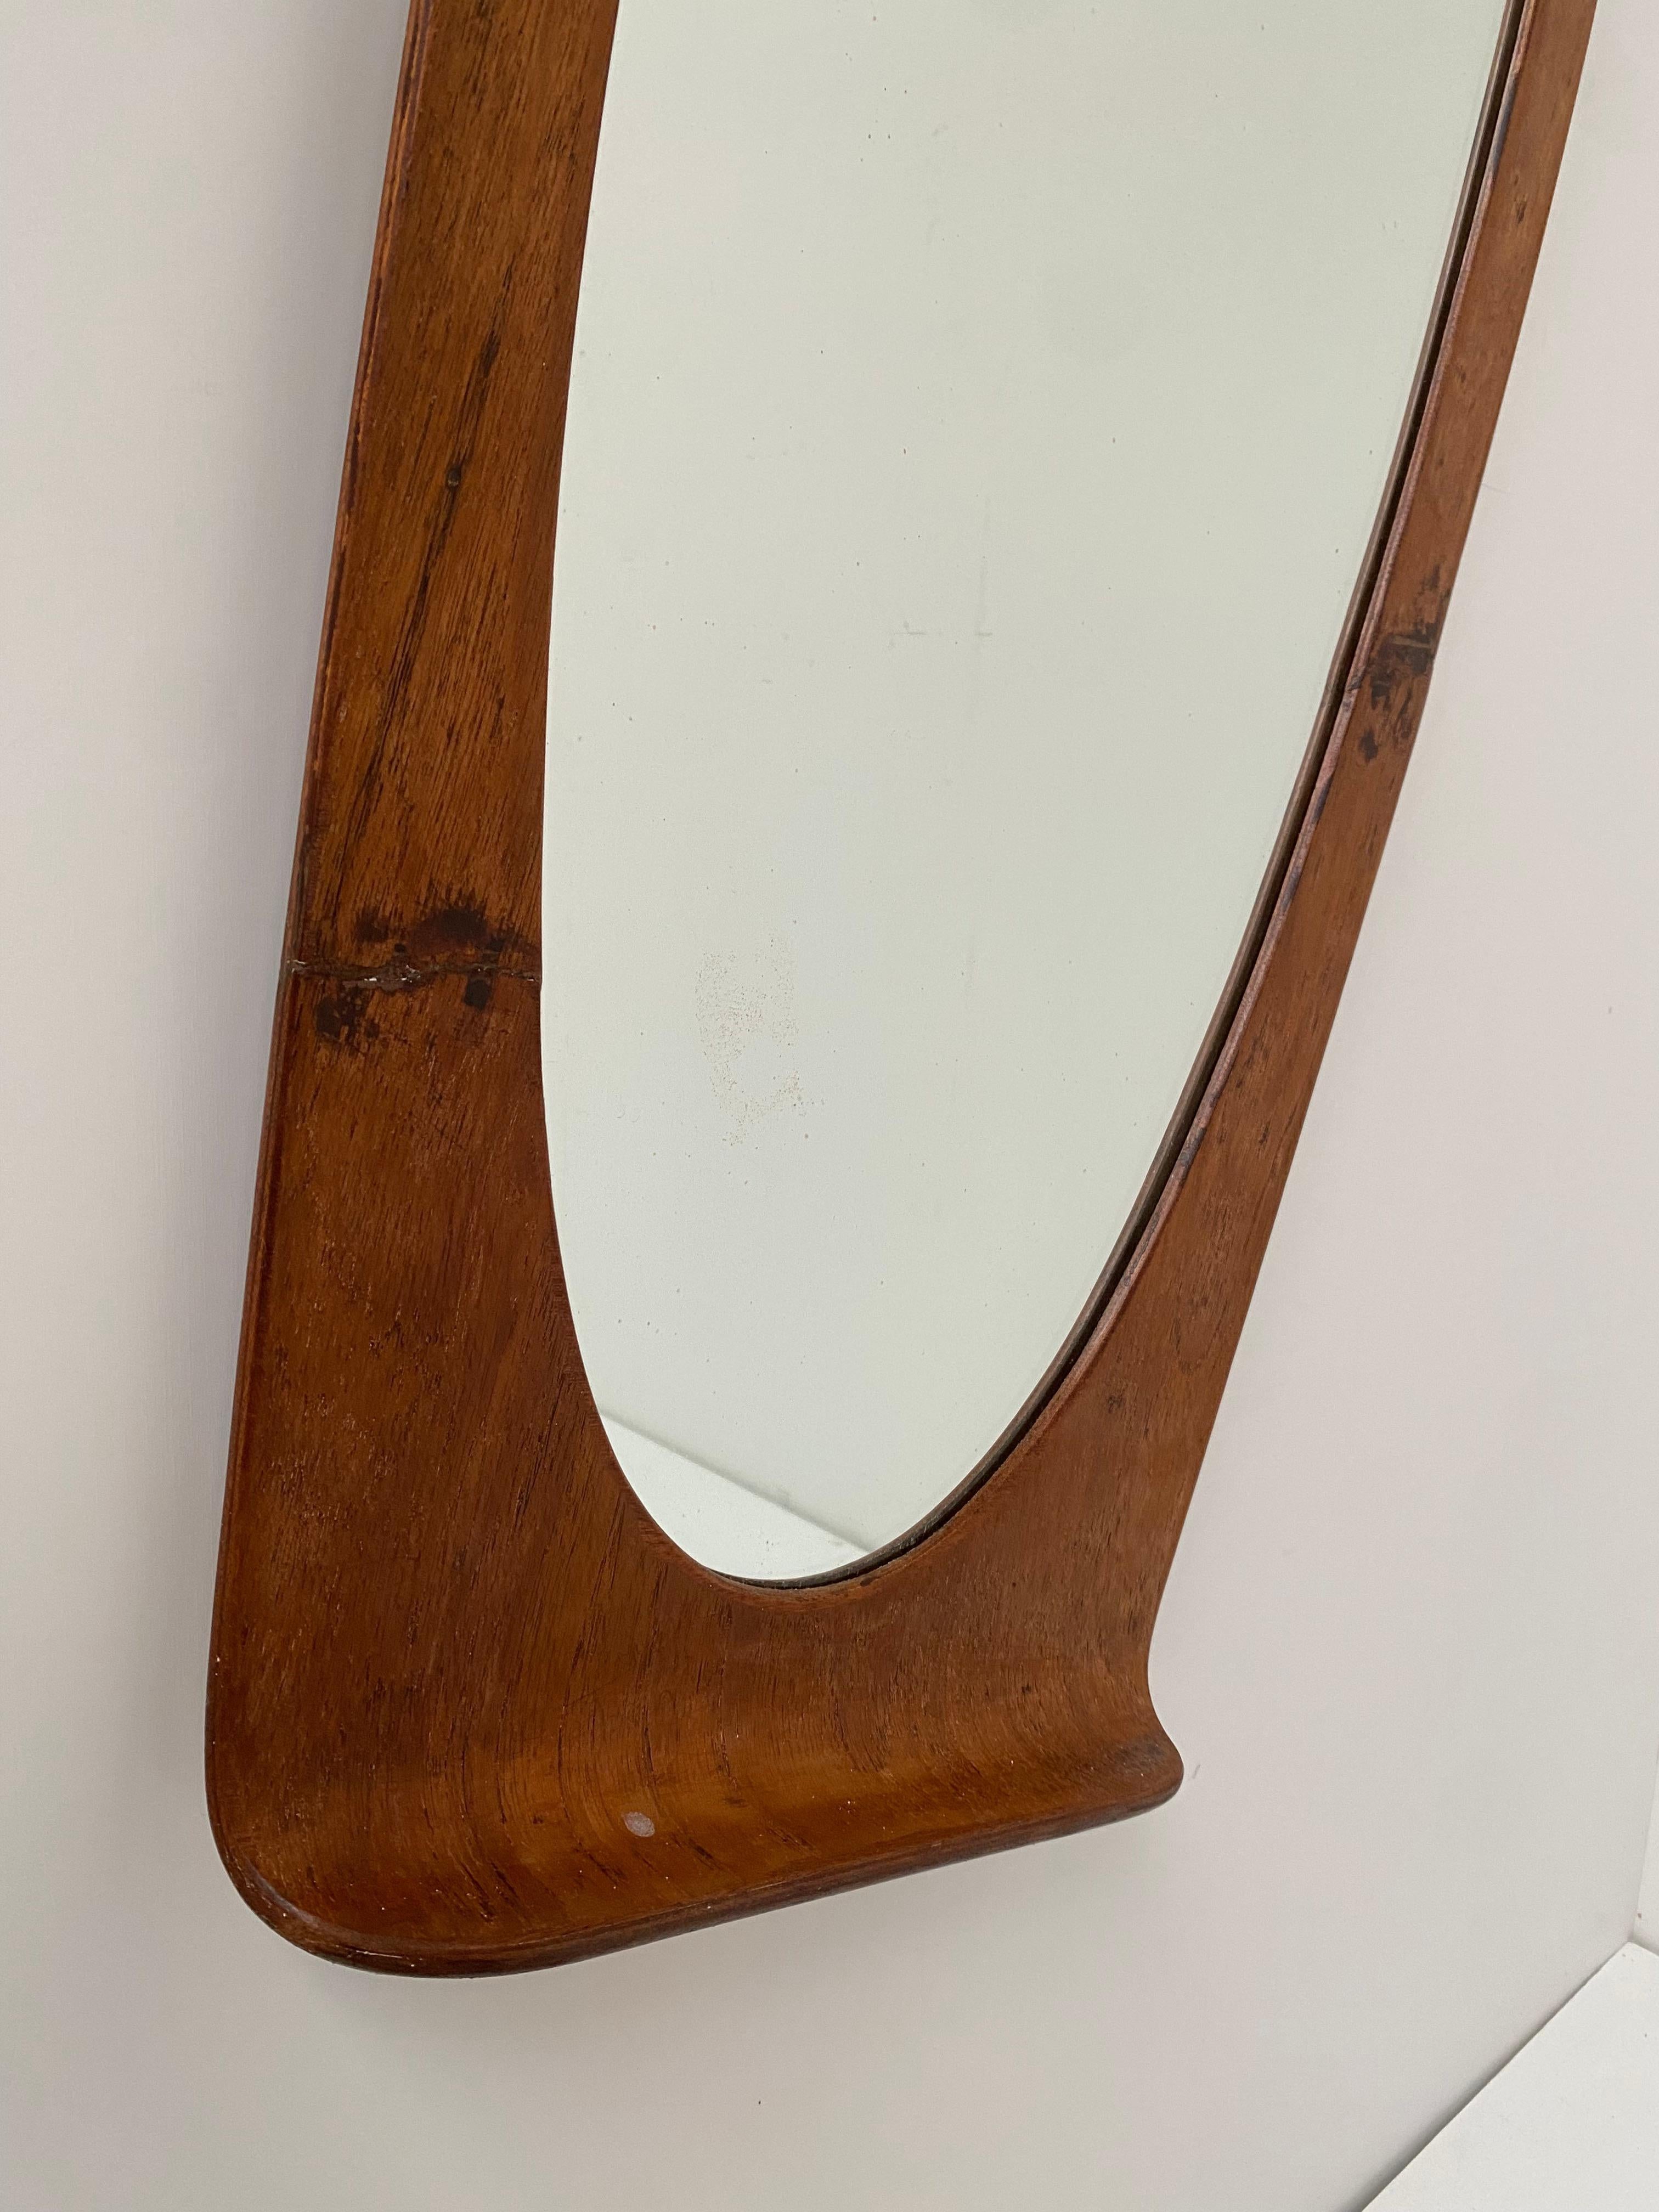 Campo & Graffi Wallmounted Teak Plywood Mirror for HOME Italy 1950's In Fair Condition For Sale In bergen op zoom, NL